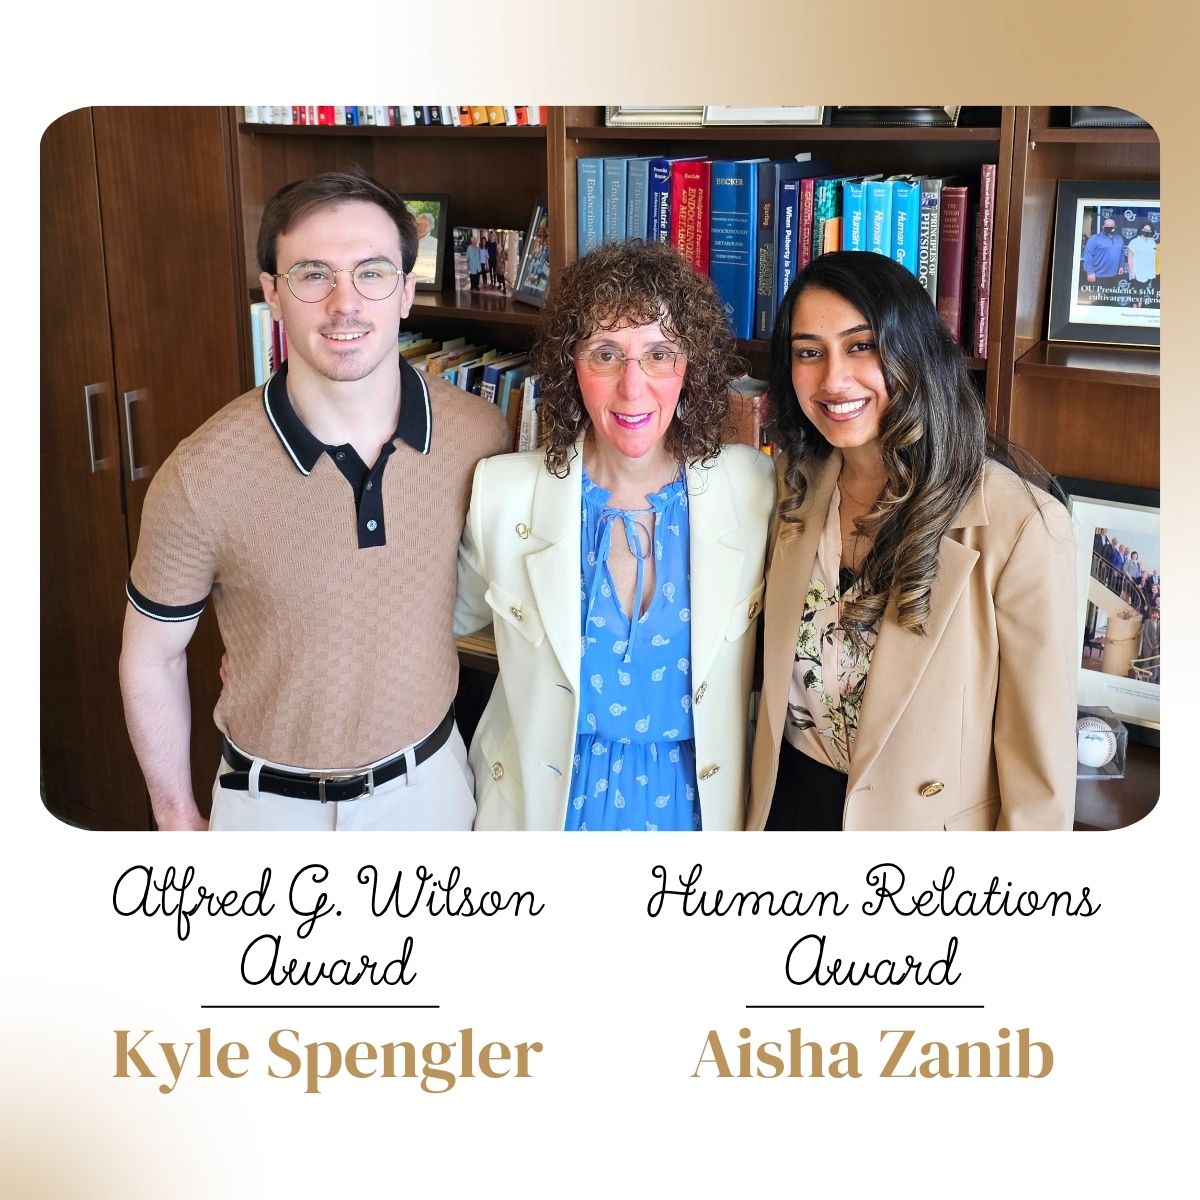 Congratulations to SHS students Kyle Spengler and Aisha Zanib for being honored with prestigous @oaklandu awards! Kyle earned the Alfred G. Wilson Award, Aisha the Human Relations Award. This is a remarkable achievement - we are incredibly proud! #BeGolden #InPurposeForHealth